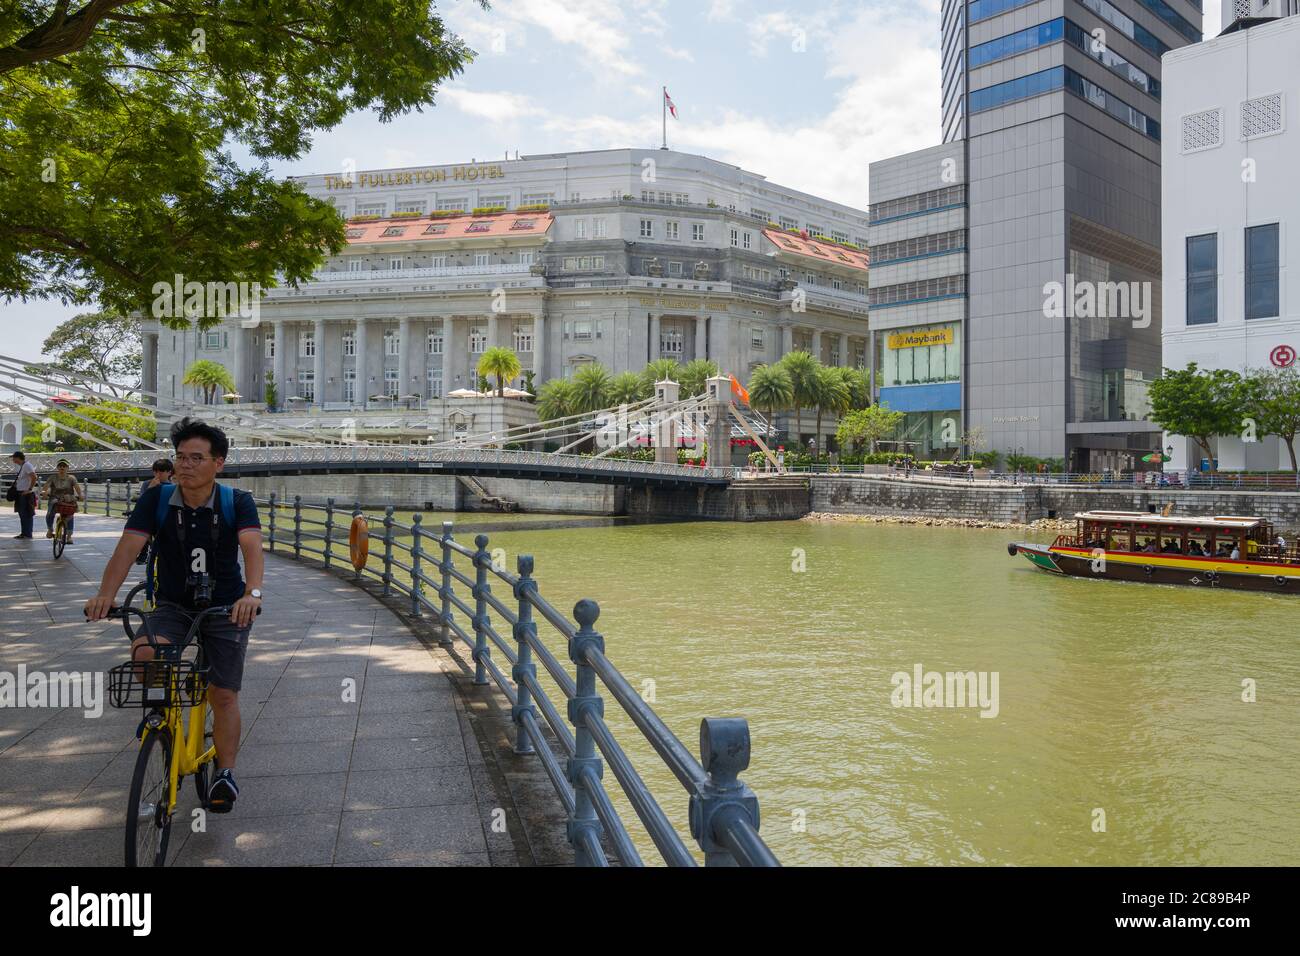 The Fullerton Hotel Singapore on the banks of the Singapore River Stock Photo